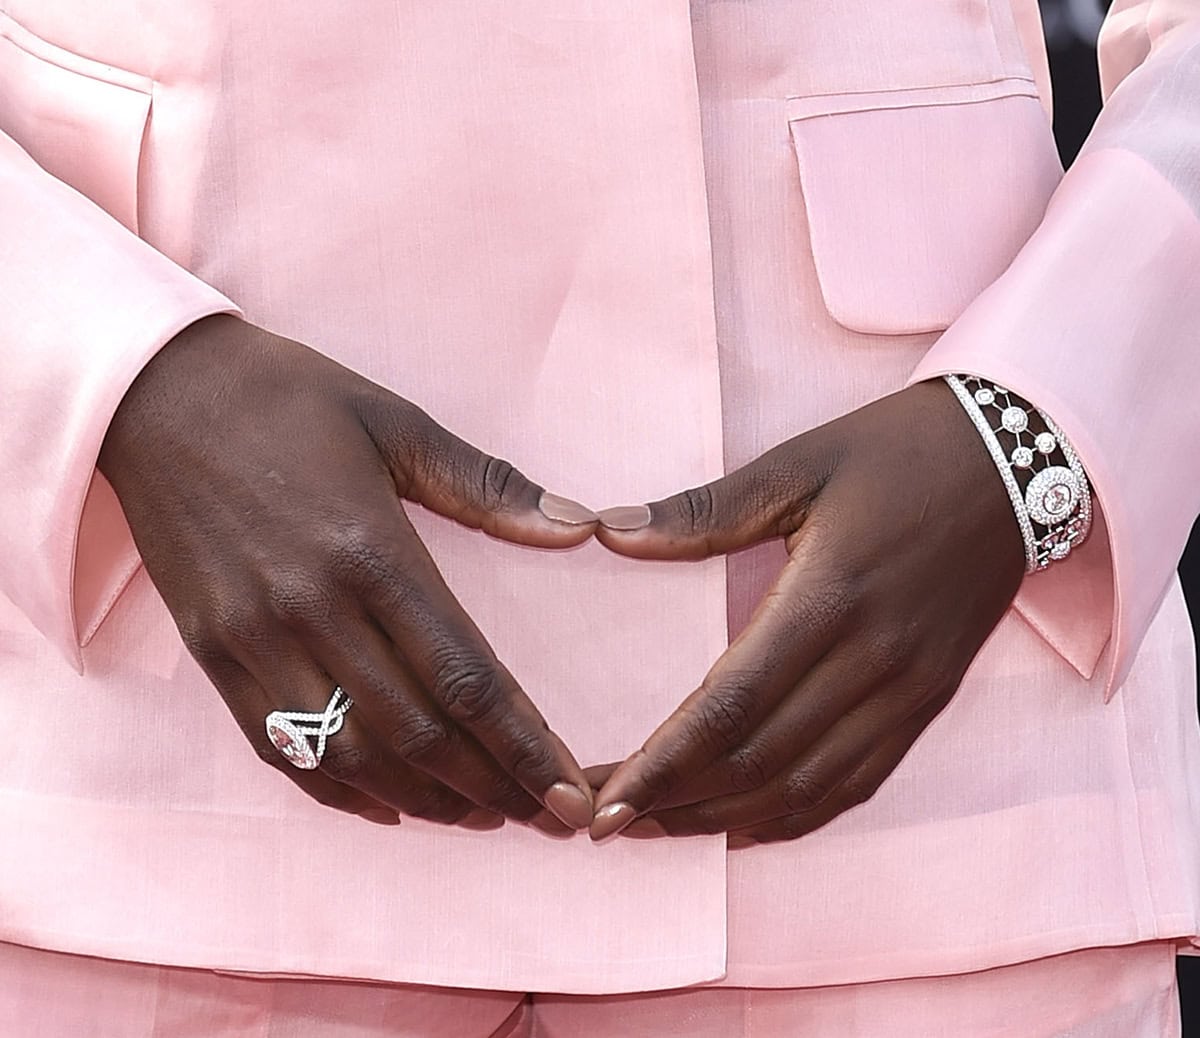 Lupita Nyong'o further enhances her look with a diamond ring and a De Beers Atomique Cuff Bracelet